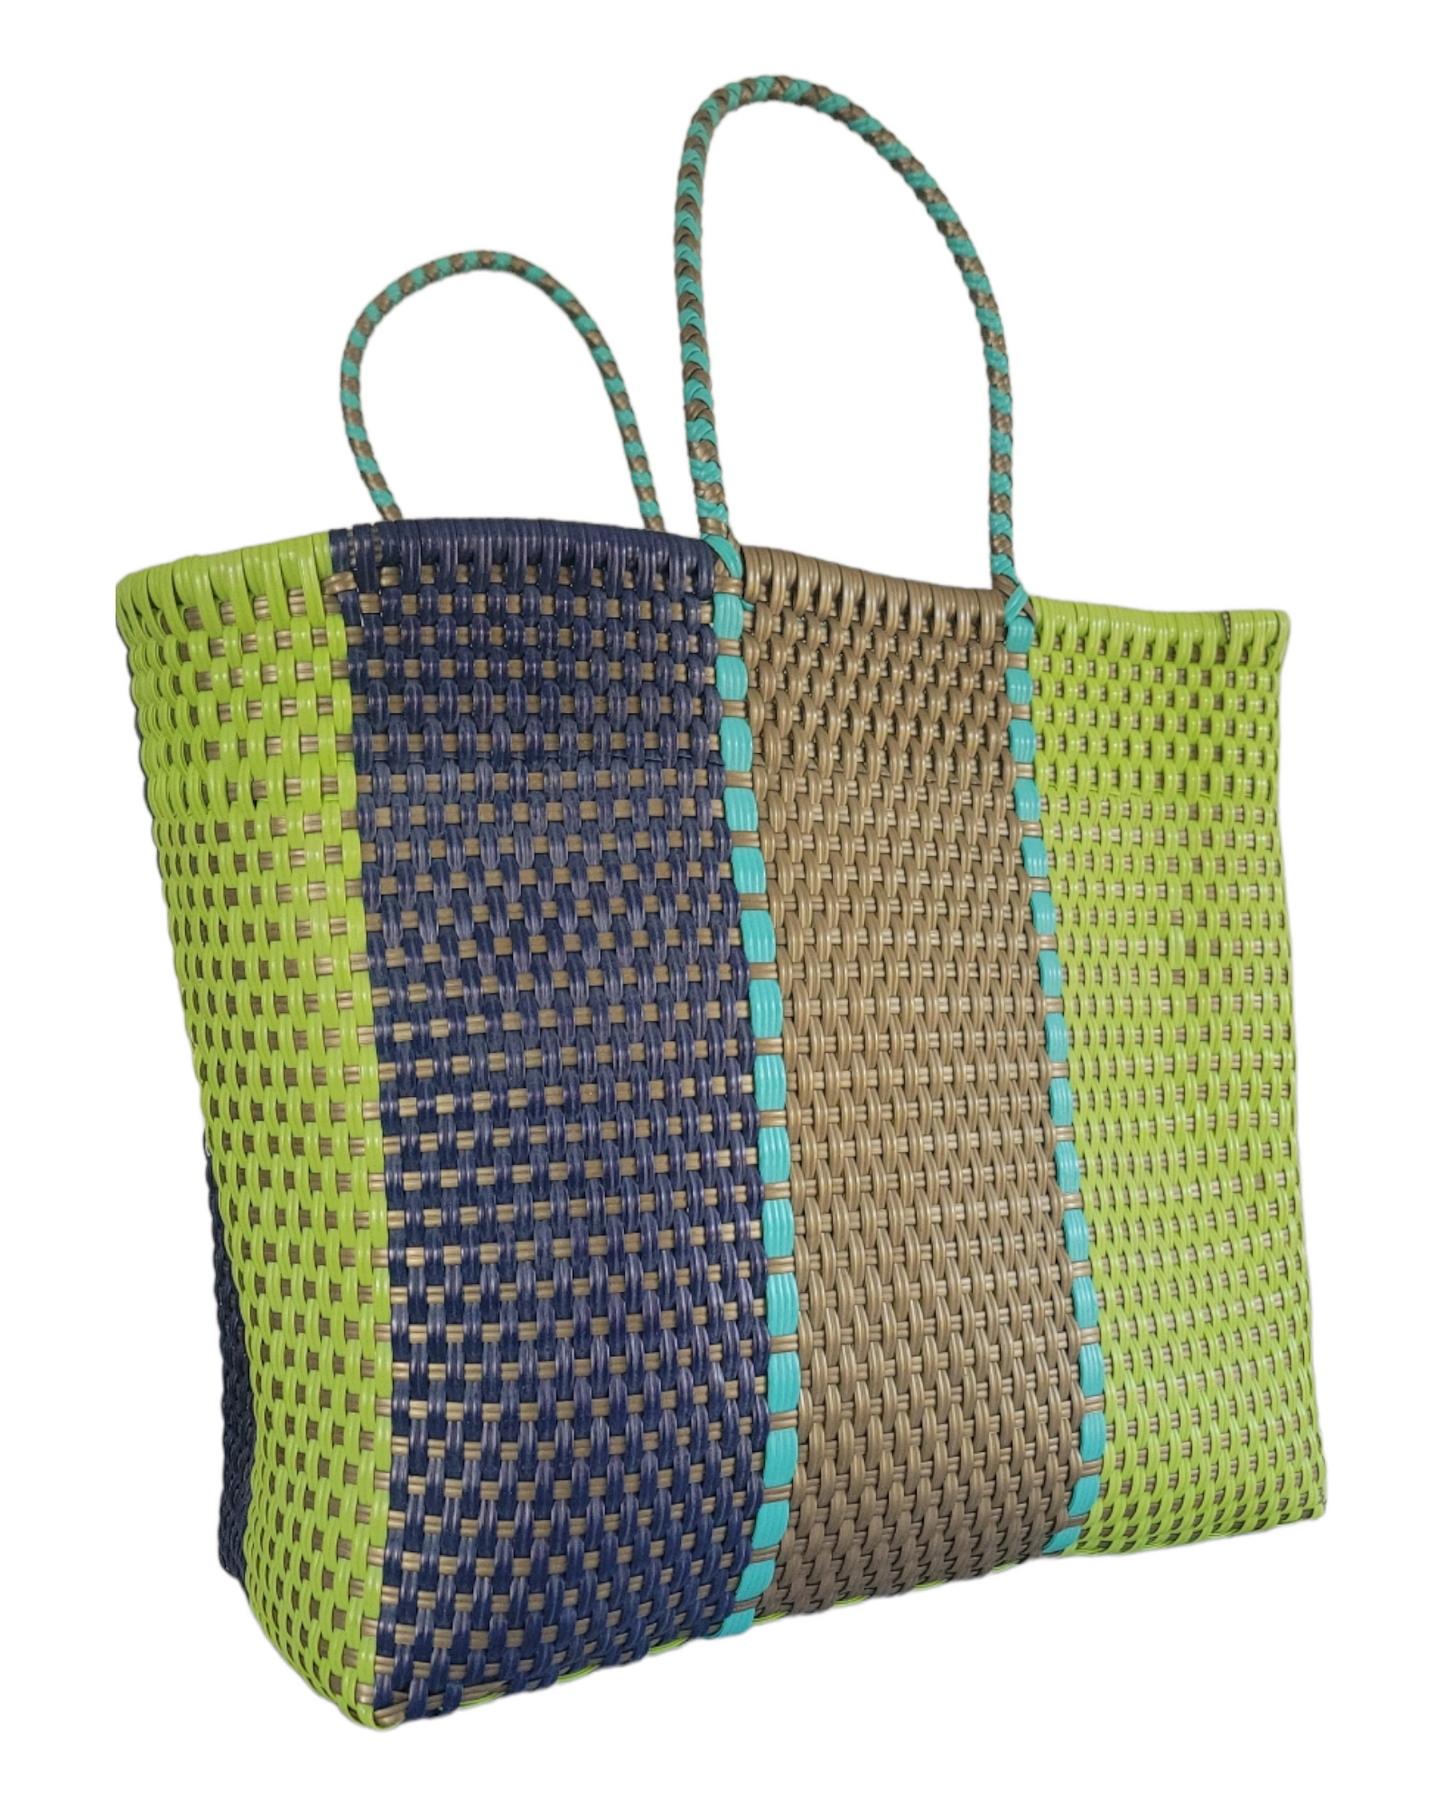 Be Praia Lime, Navy & Gold Large Tote | Beach Tote. Handwoven Recycled Bag